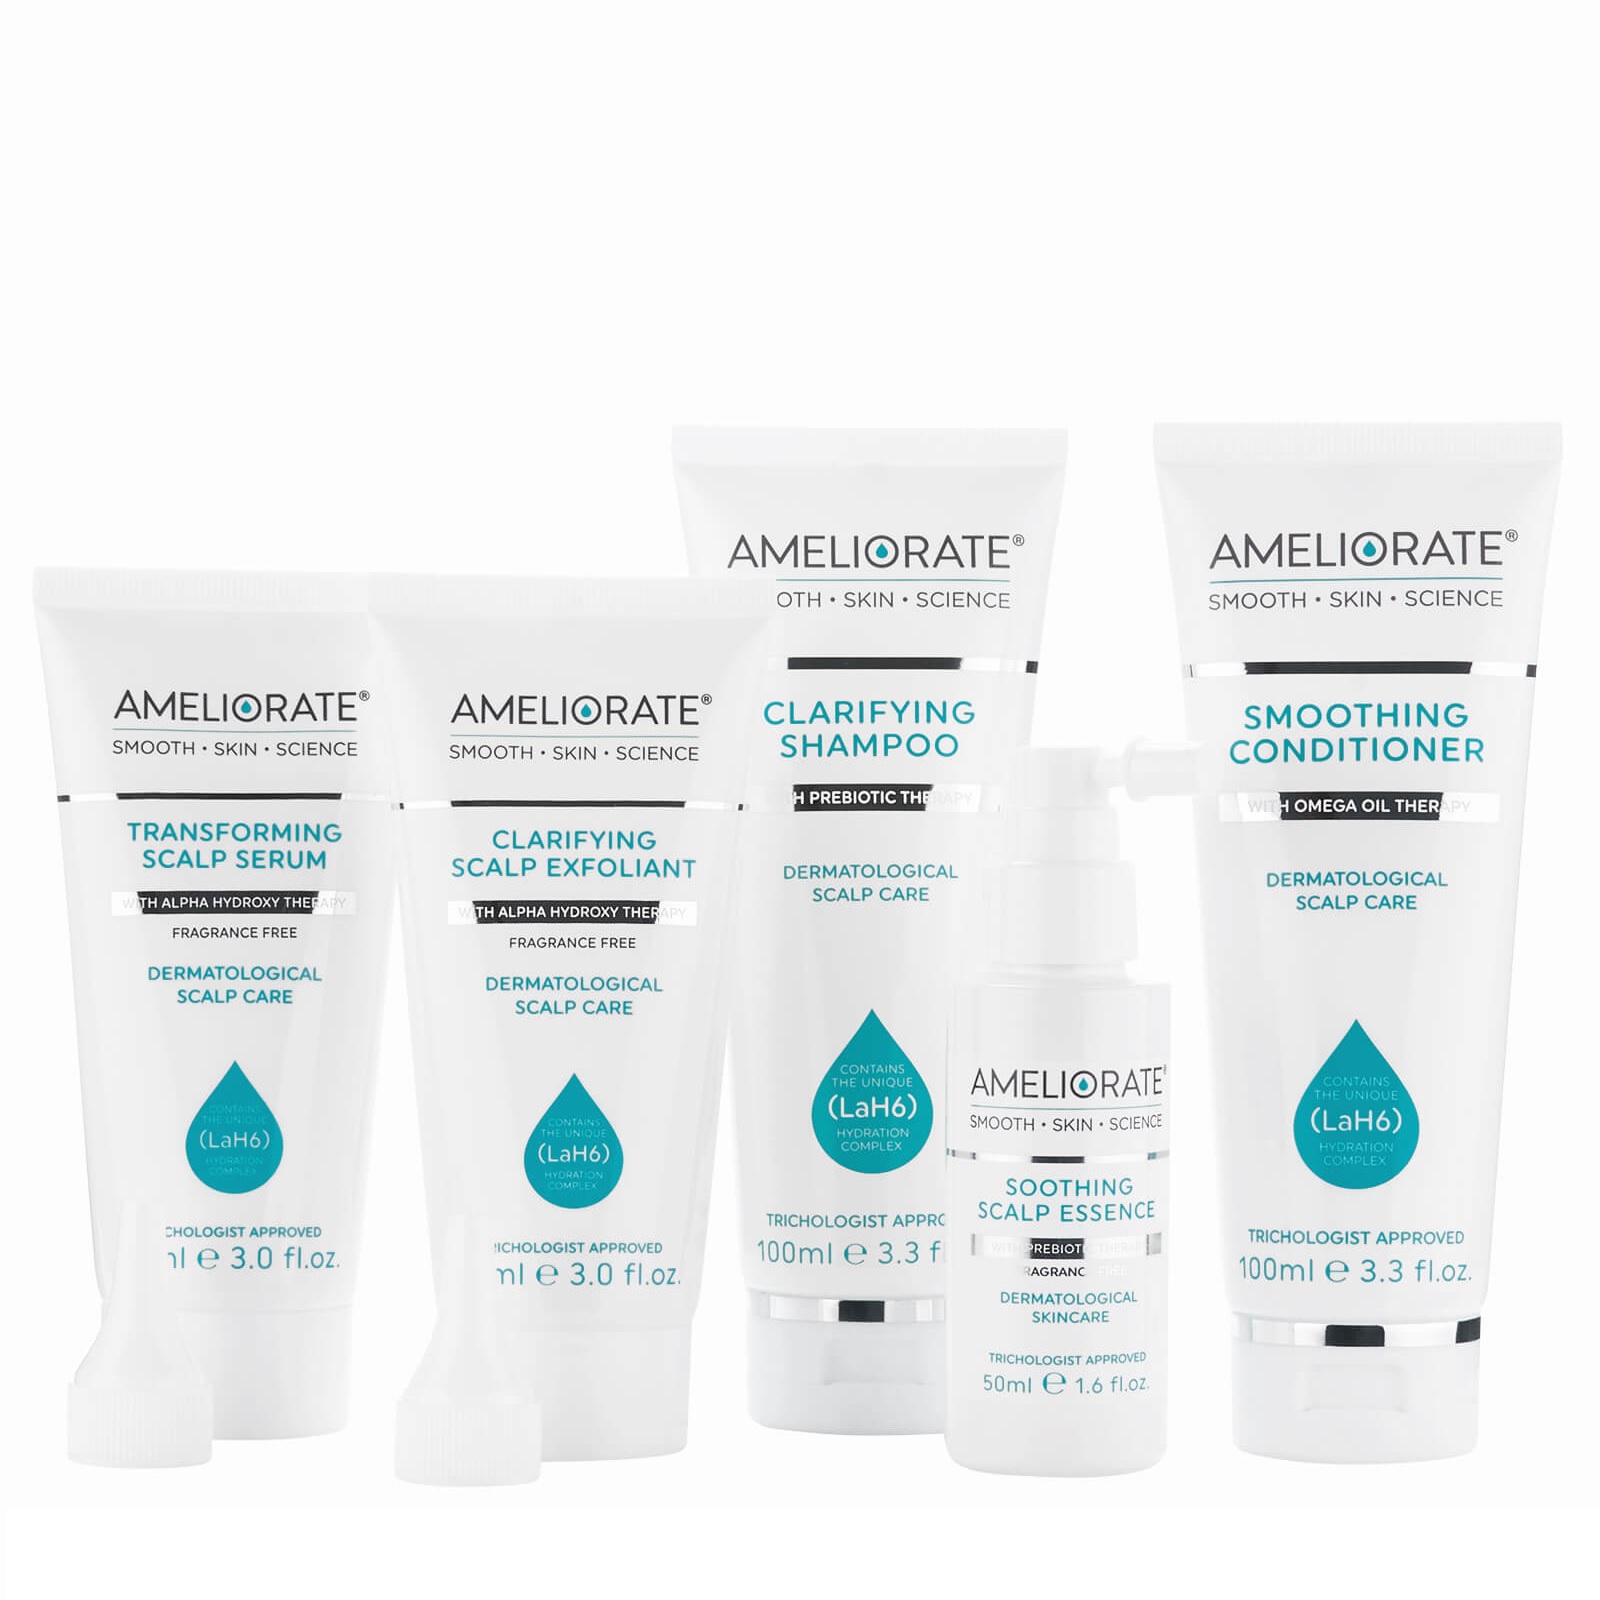 Ameliorate: Enjoy a FULL SIZE Softening Bath Milk Oil when you spend £50